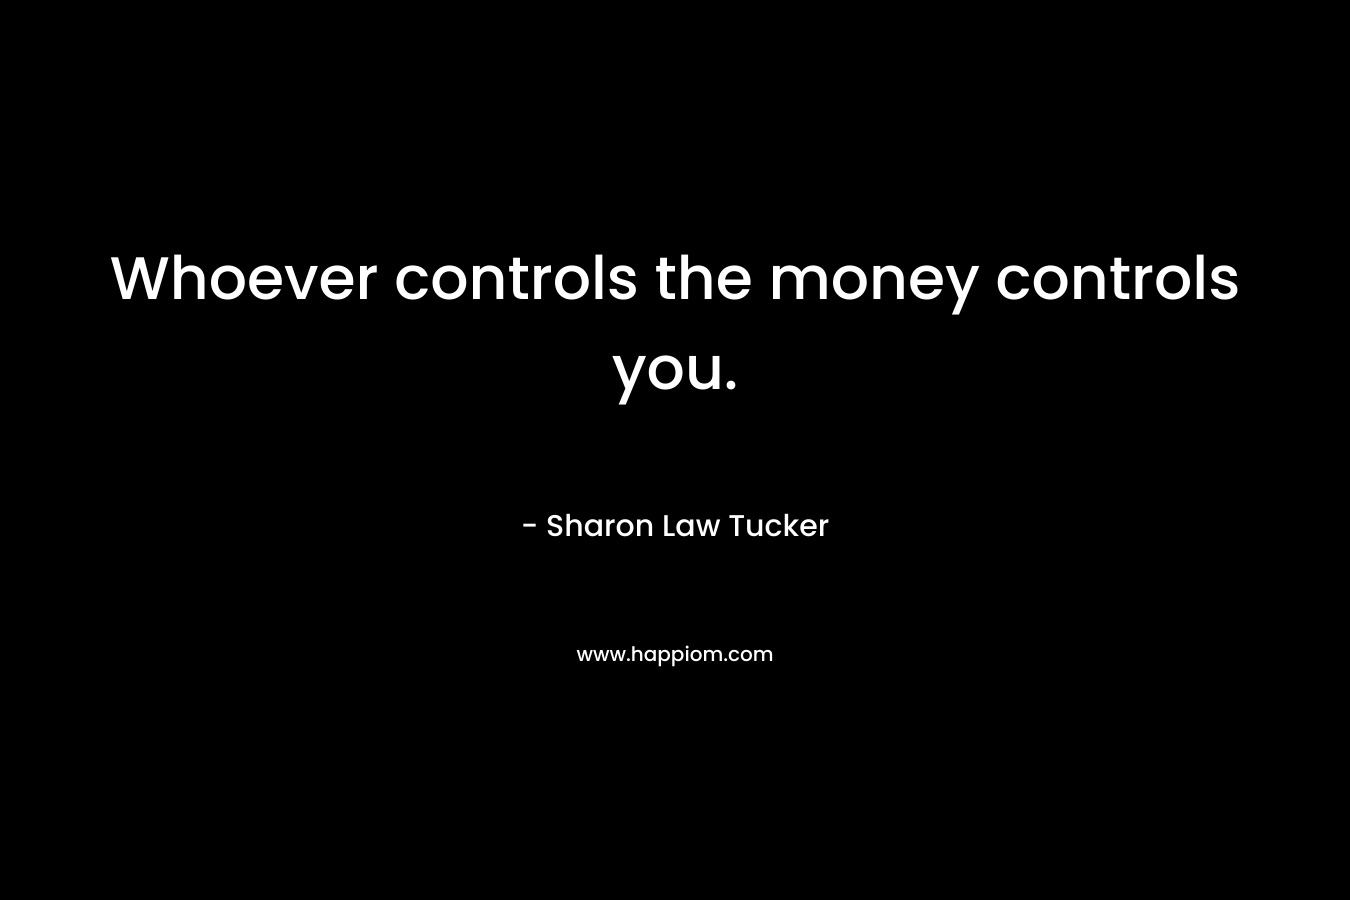 Whoever controls the money controls you.